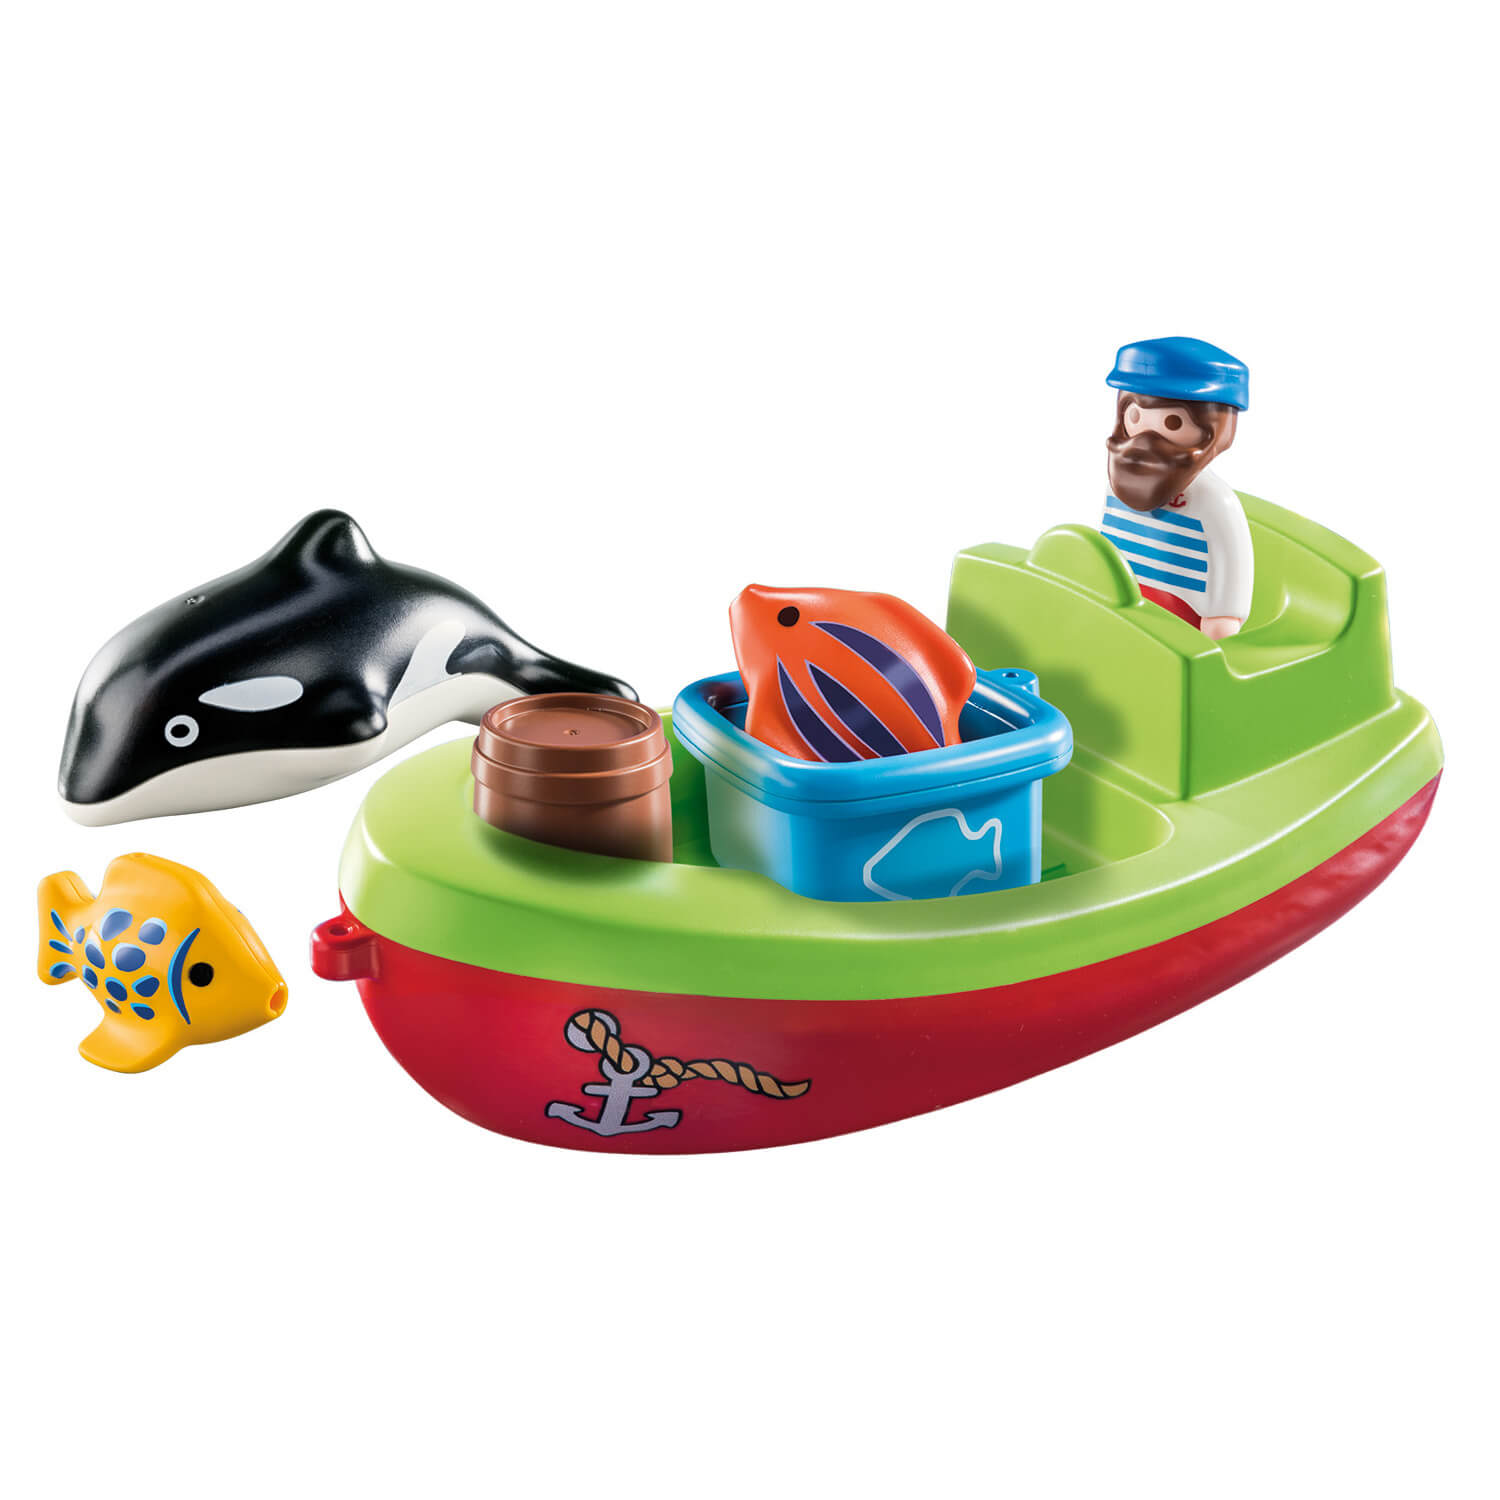 PLAYMOBIL 1.2.3 Fisherman with Boat (70183)